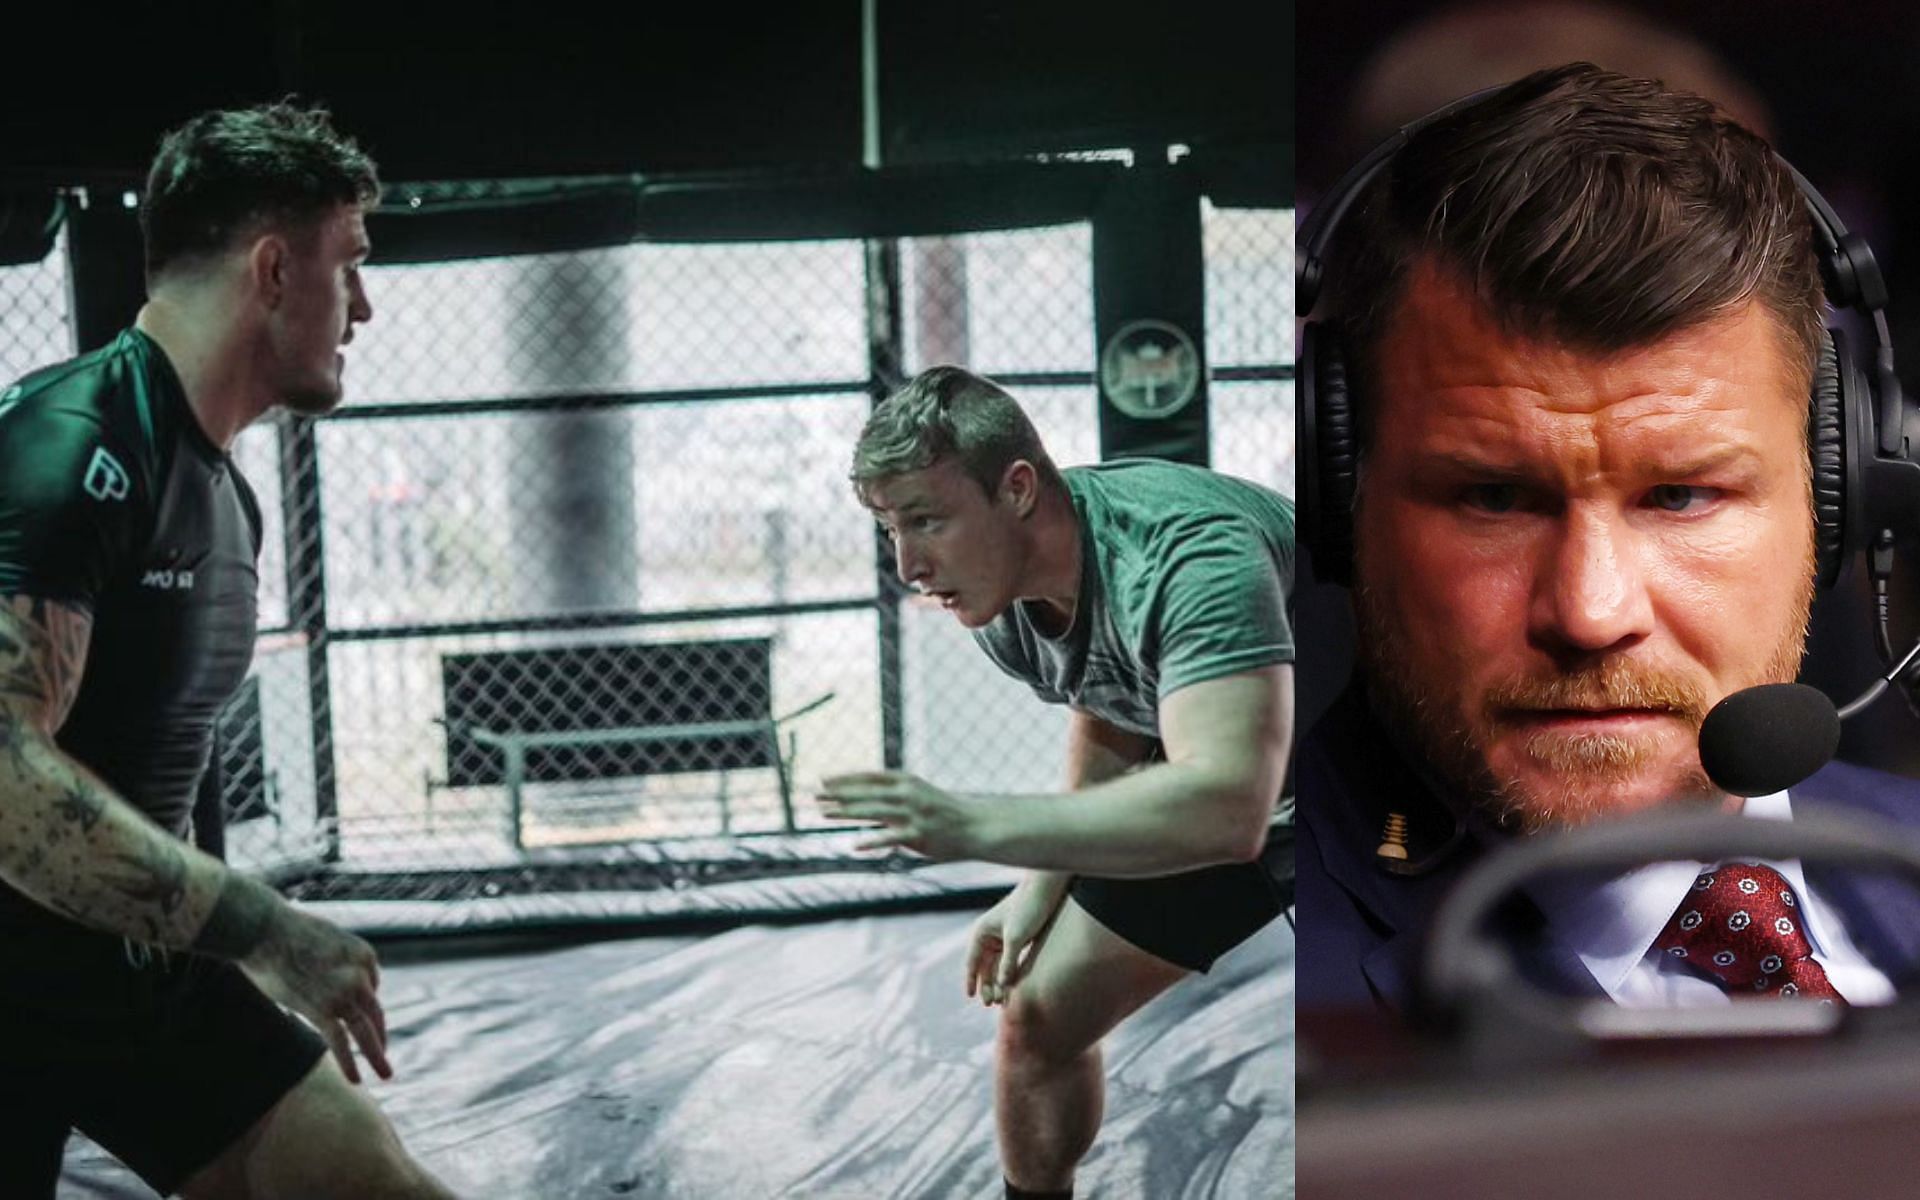 Tom Aspinall and Callum Bisping sparring (left), and Michael Bisping (right). [Left image courtesy @calpolkidSF on Twitter)